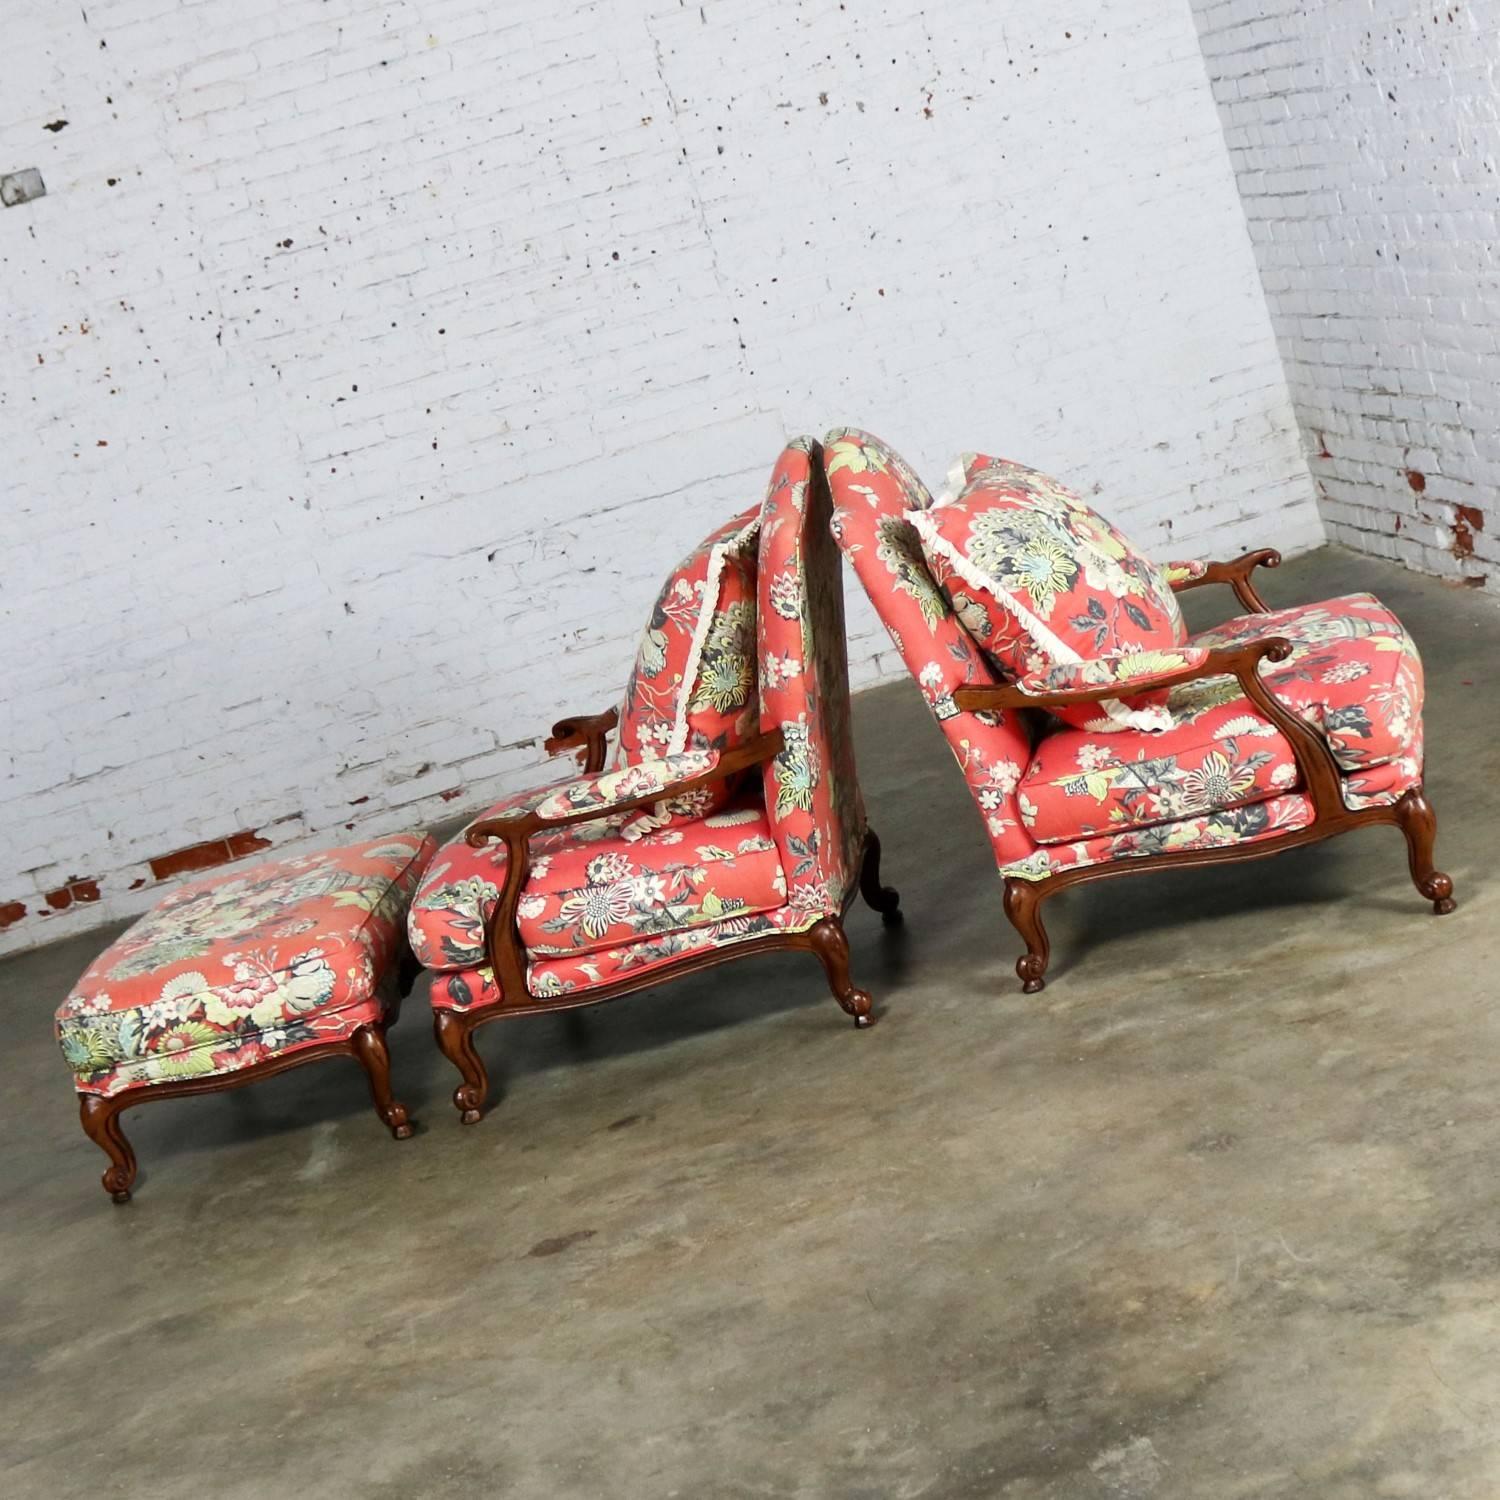 Great pair of very overscale fauteuil chairs with a shared ottoman by C.R. Laine in a coral or faded red floral cotton-like fabric. They are in wonderful pre-owned condition with a purposeful faded look; however the ottoman has a more faded look